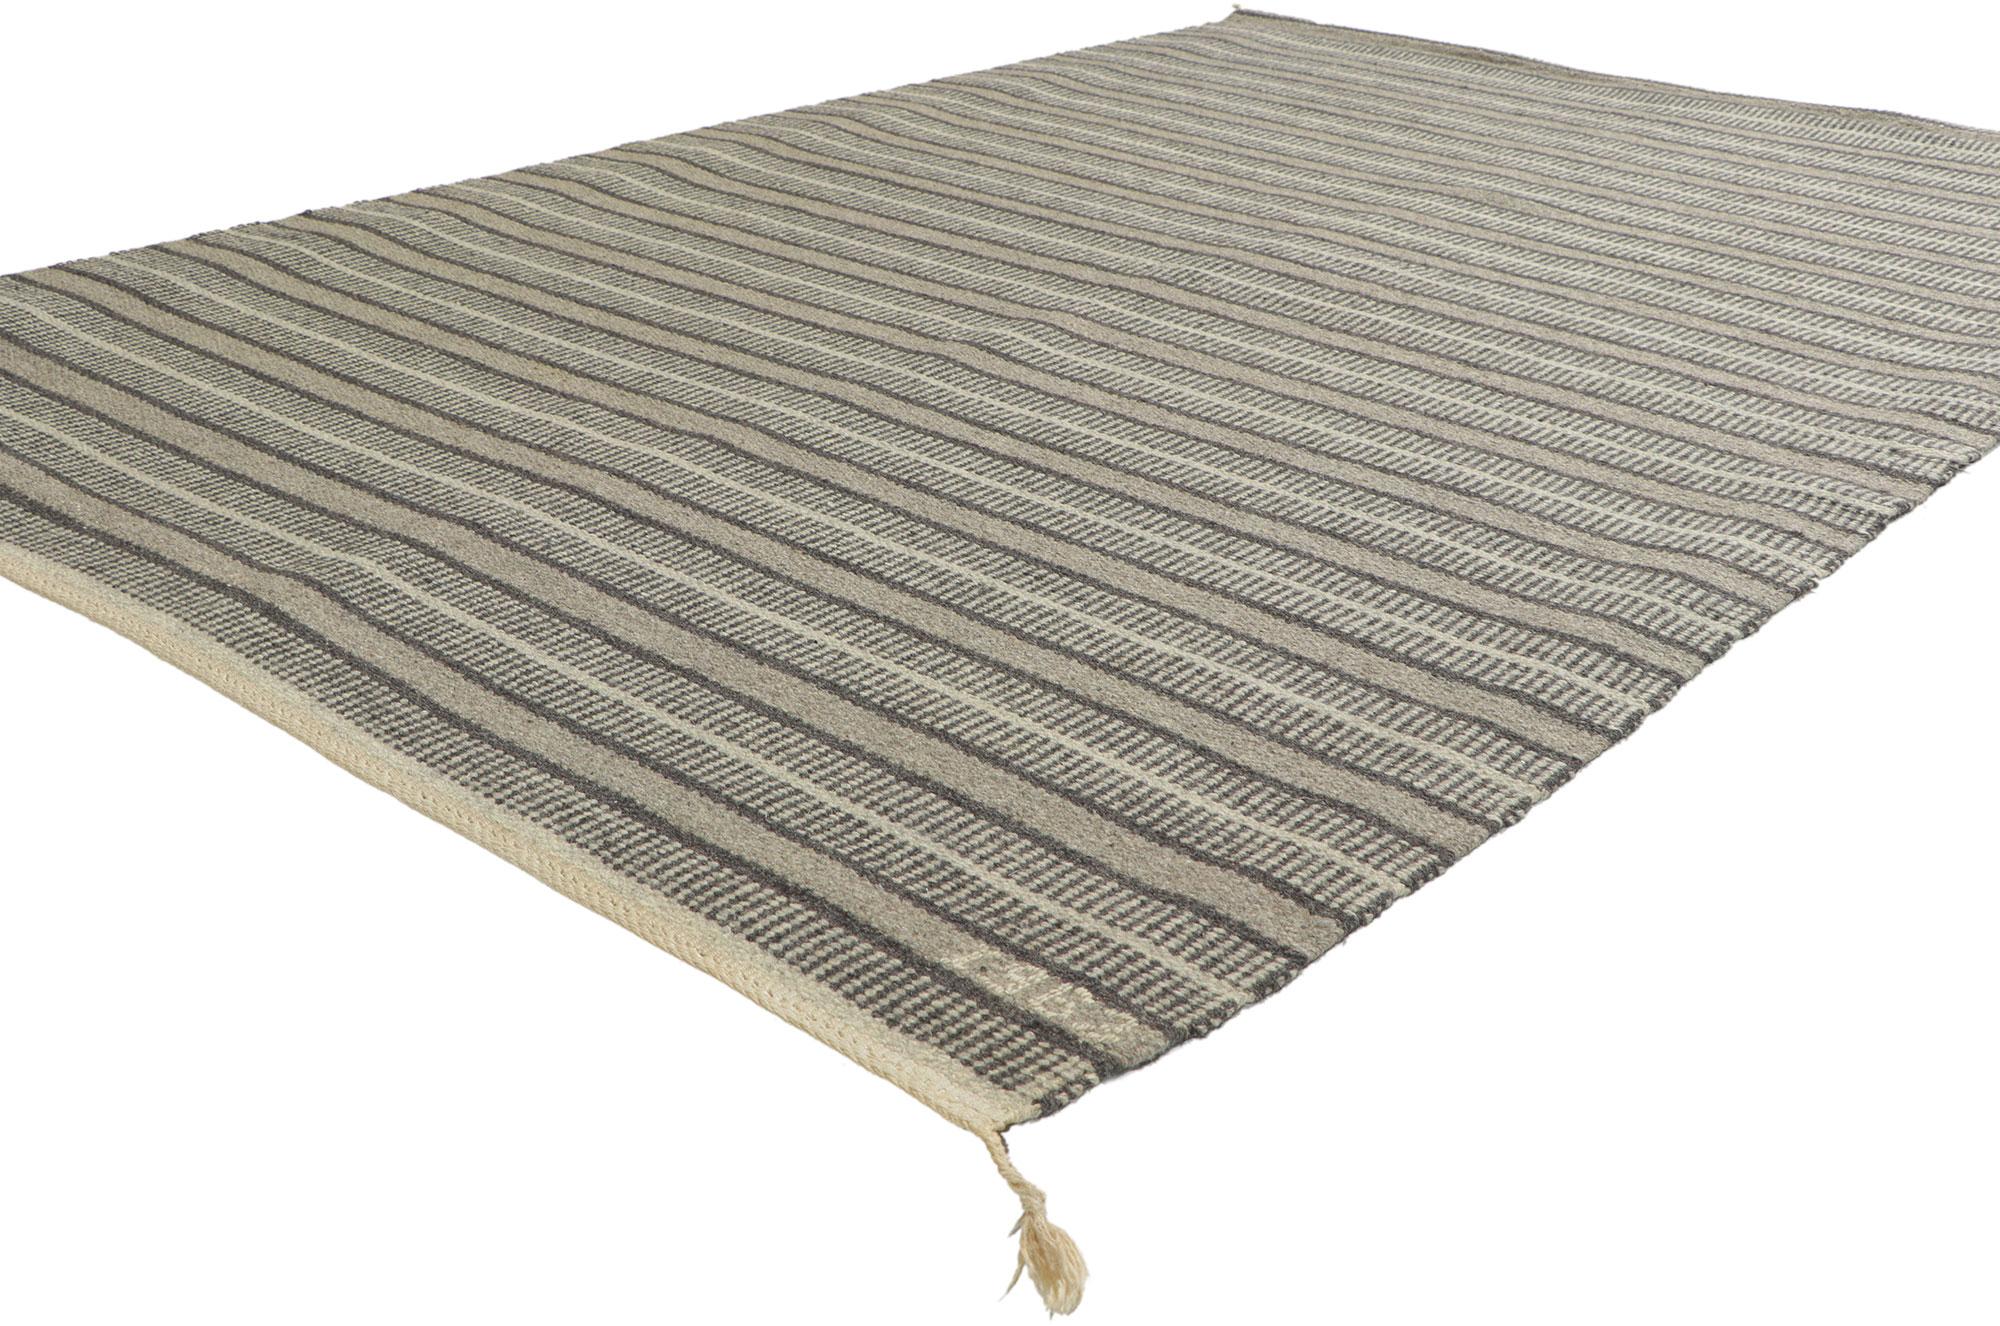 78481 Vintage Swedish Kilim Rug Rollakan, 04'09 x 07'05. Displaying simplicity with incredible detail and texture, this handwoven wool vintage Swedish rollakan rug provides a feeling of cozy contentment without the clutter. The eye-catching linear